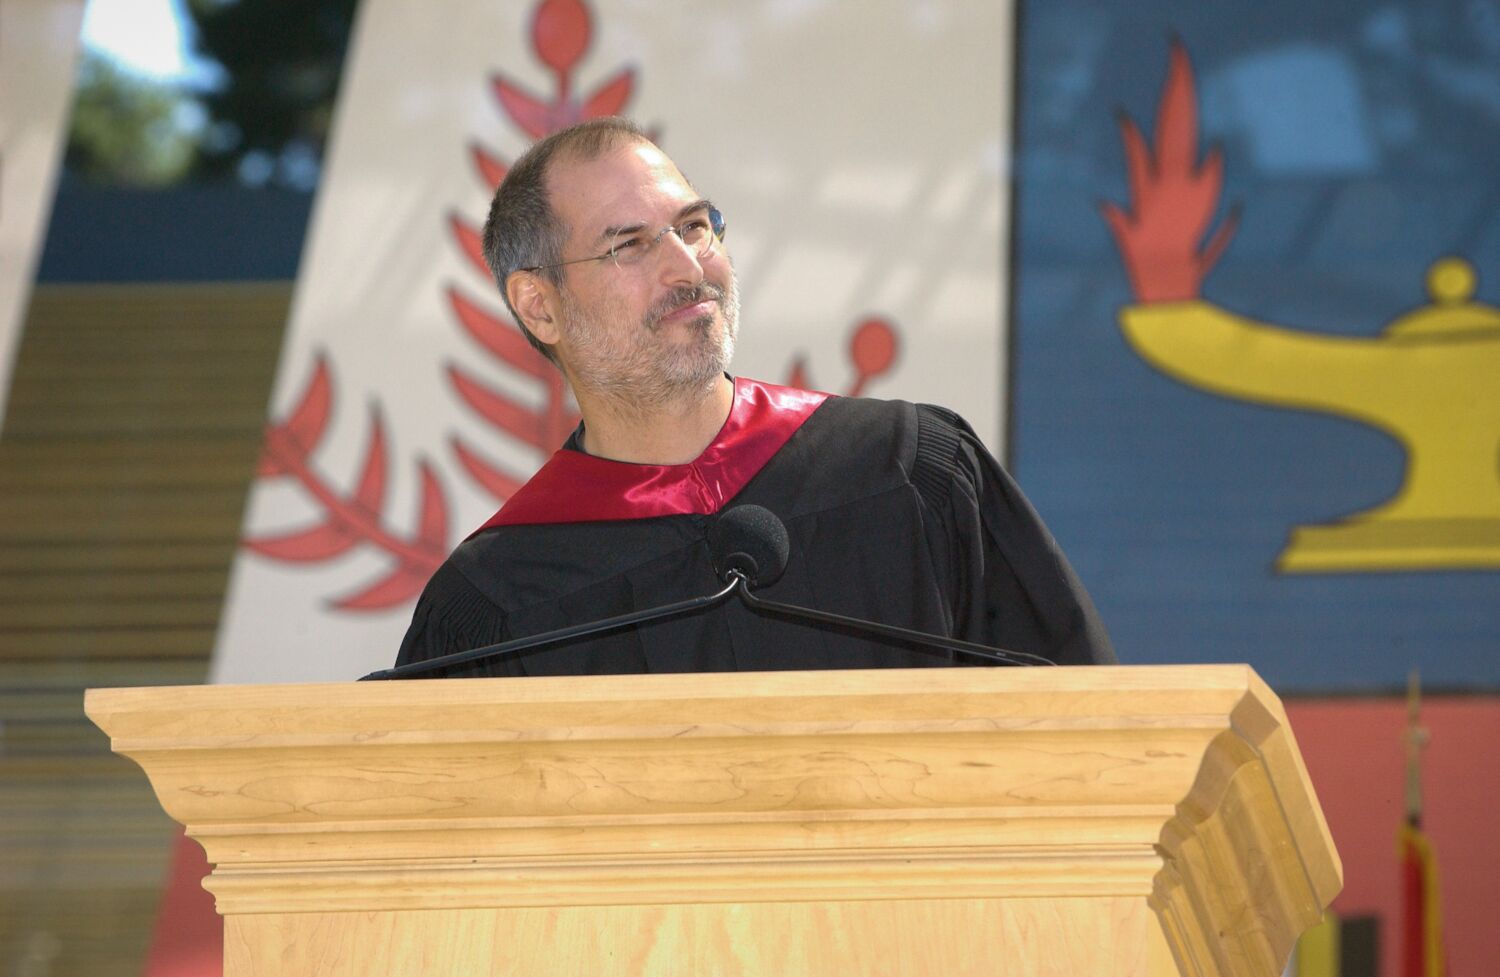 Steve smiles at the lectern in graduation robes while giving the 2005 commencement speech at Stanford University.